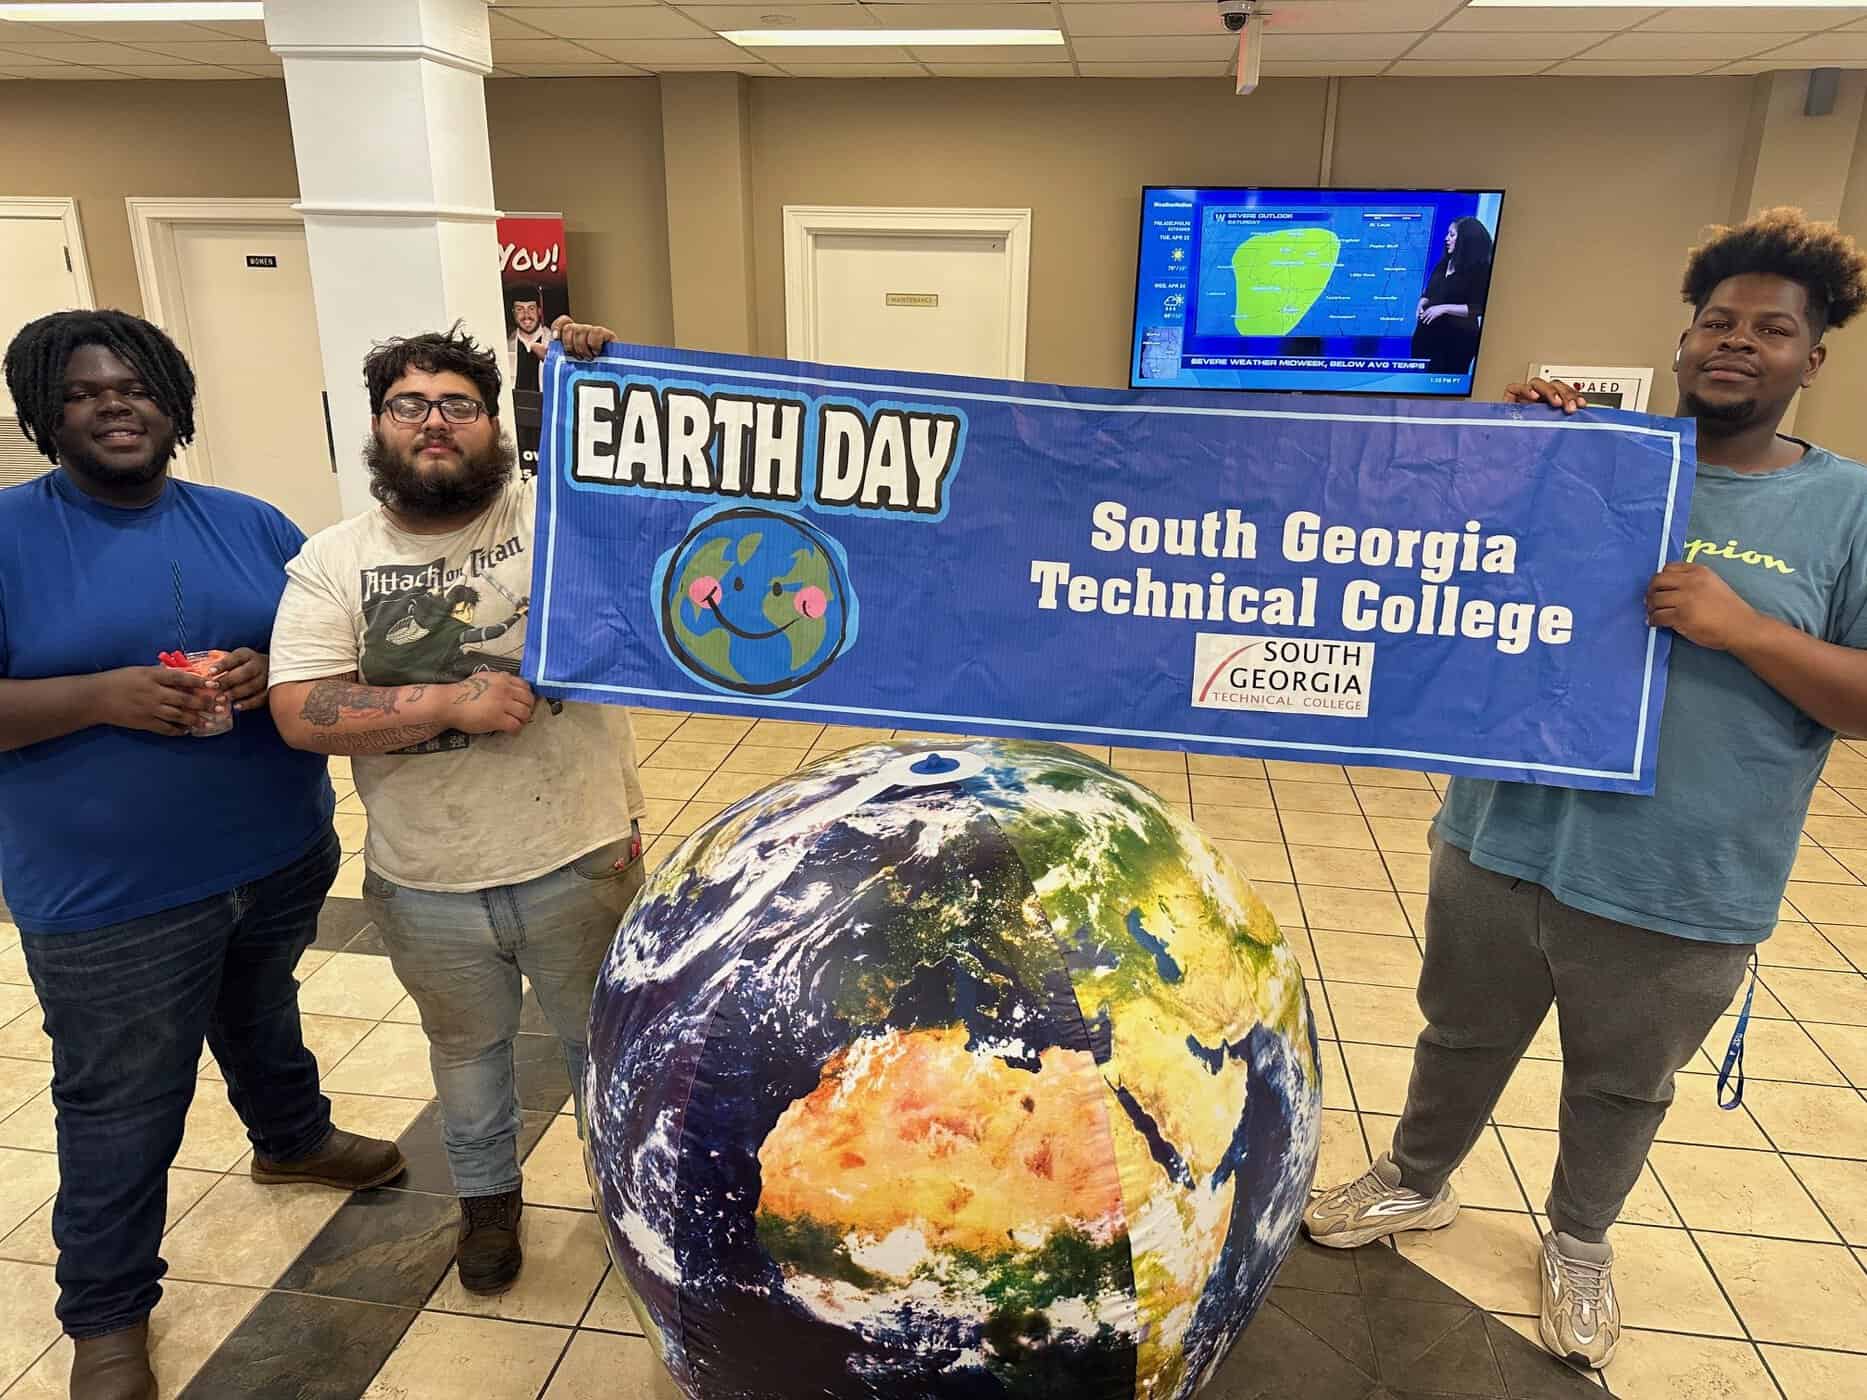 SGTC students are shown above setting up for the Earth Day celebration.